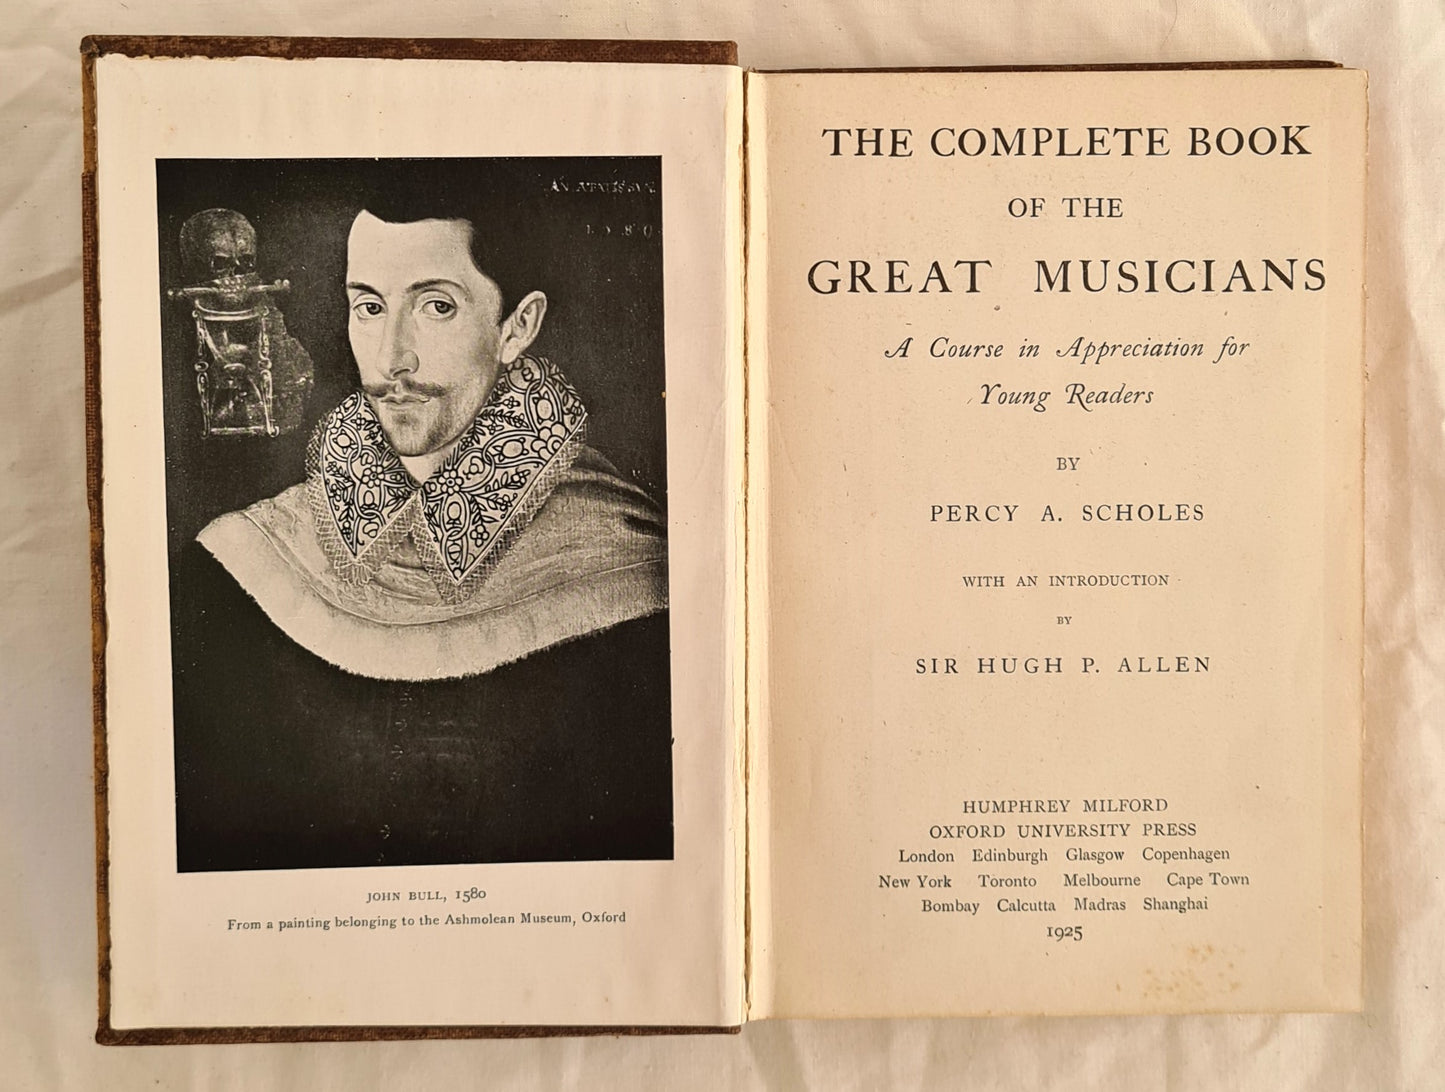 The Complete Book of the Great Musicians  A Course in Appreciation for Young Readers  by Percy A. Scholes